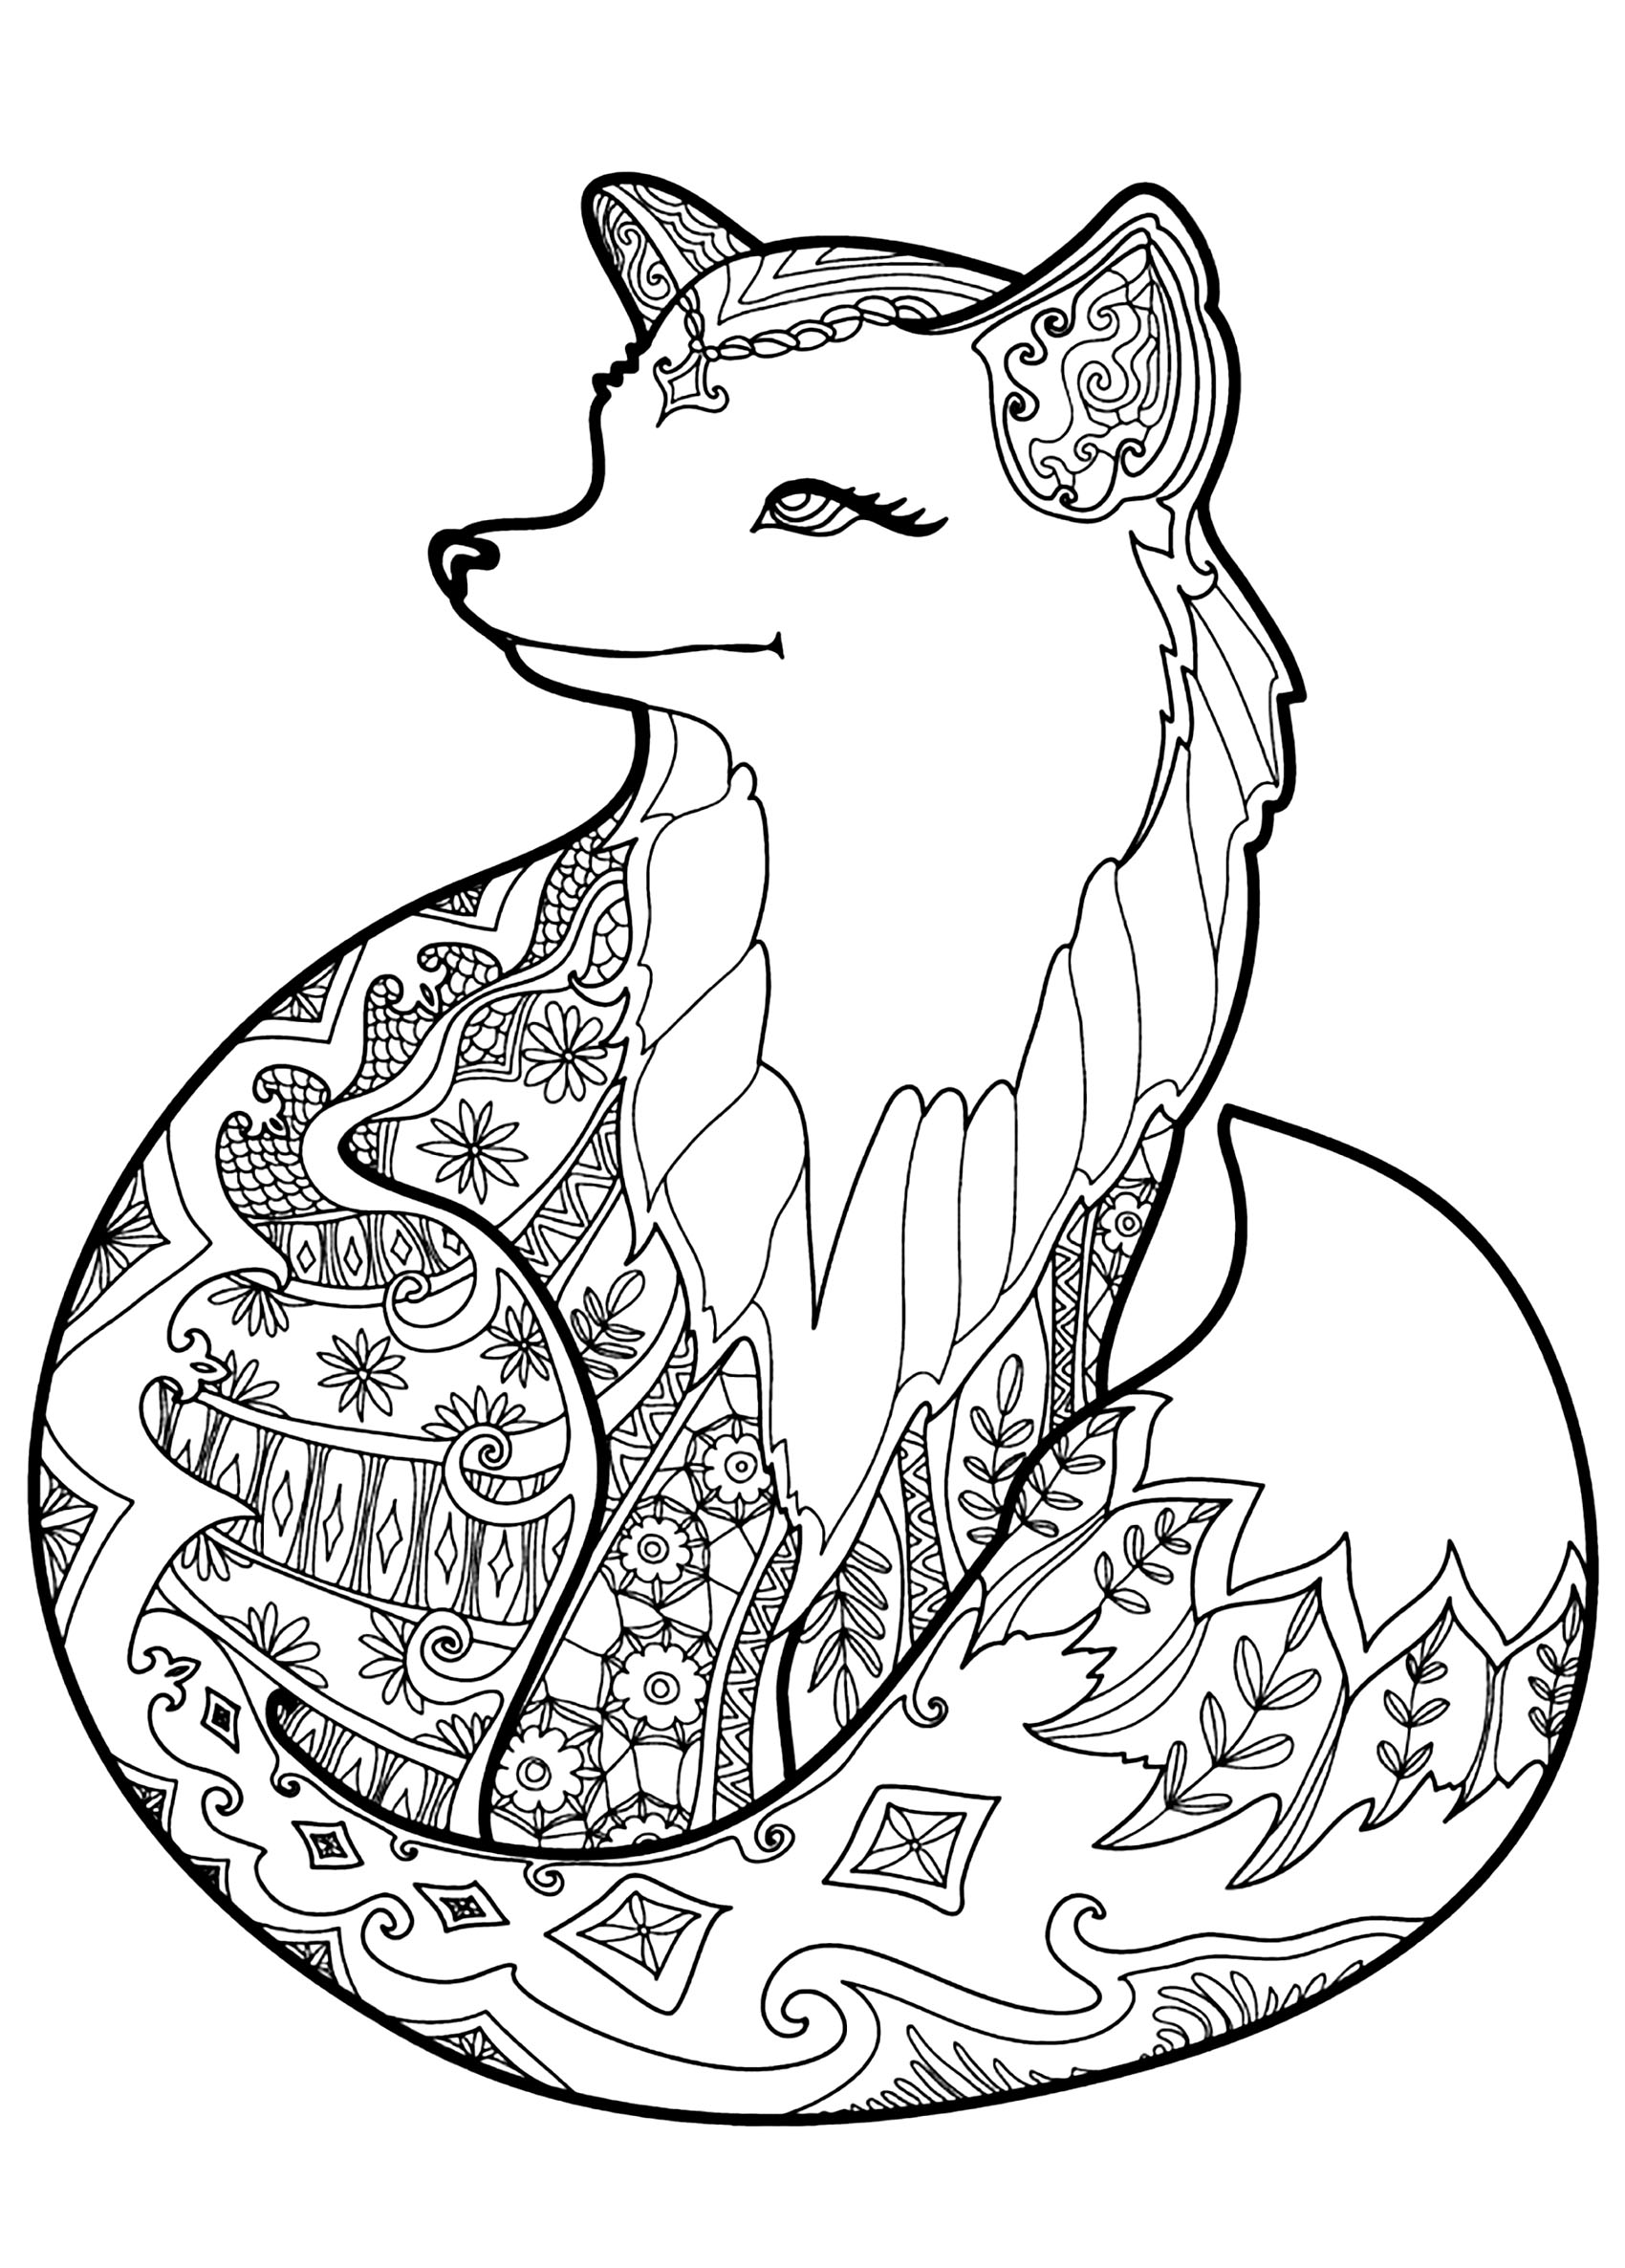 Fox with beautiful patterns Foxes Adult Coloring Pages